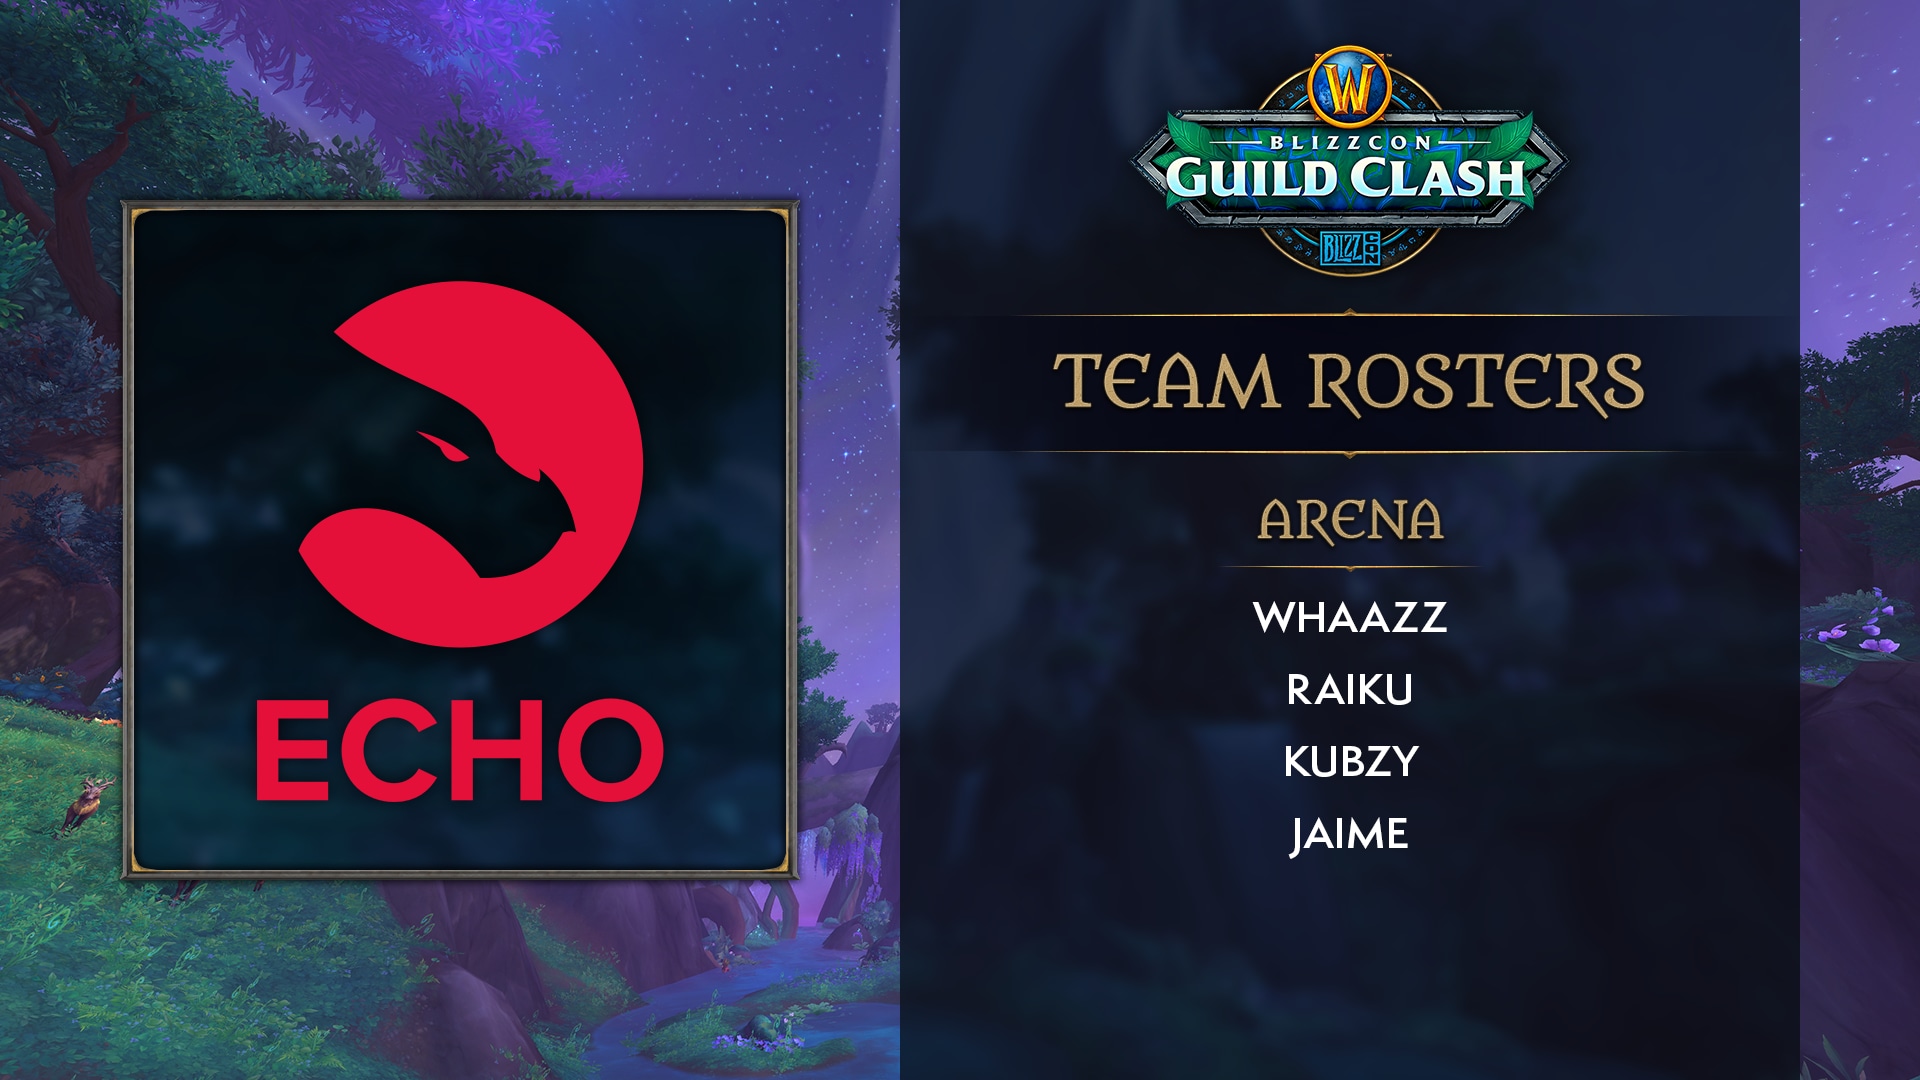 WoW_Esports_Blizzcon_GuildClash_TeamRoster_echo_arena.png